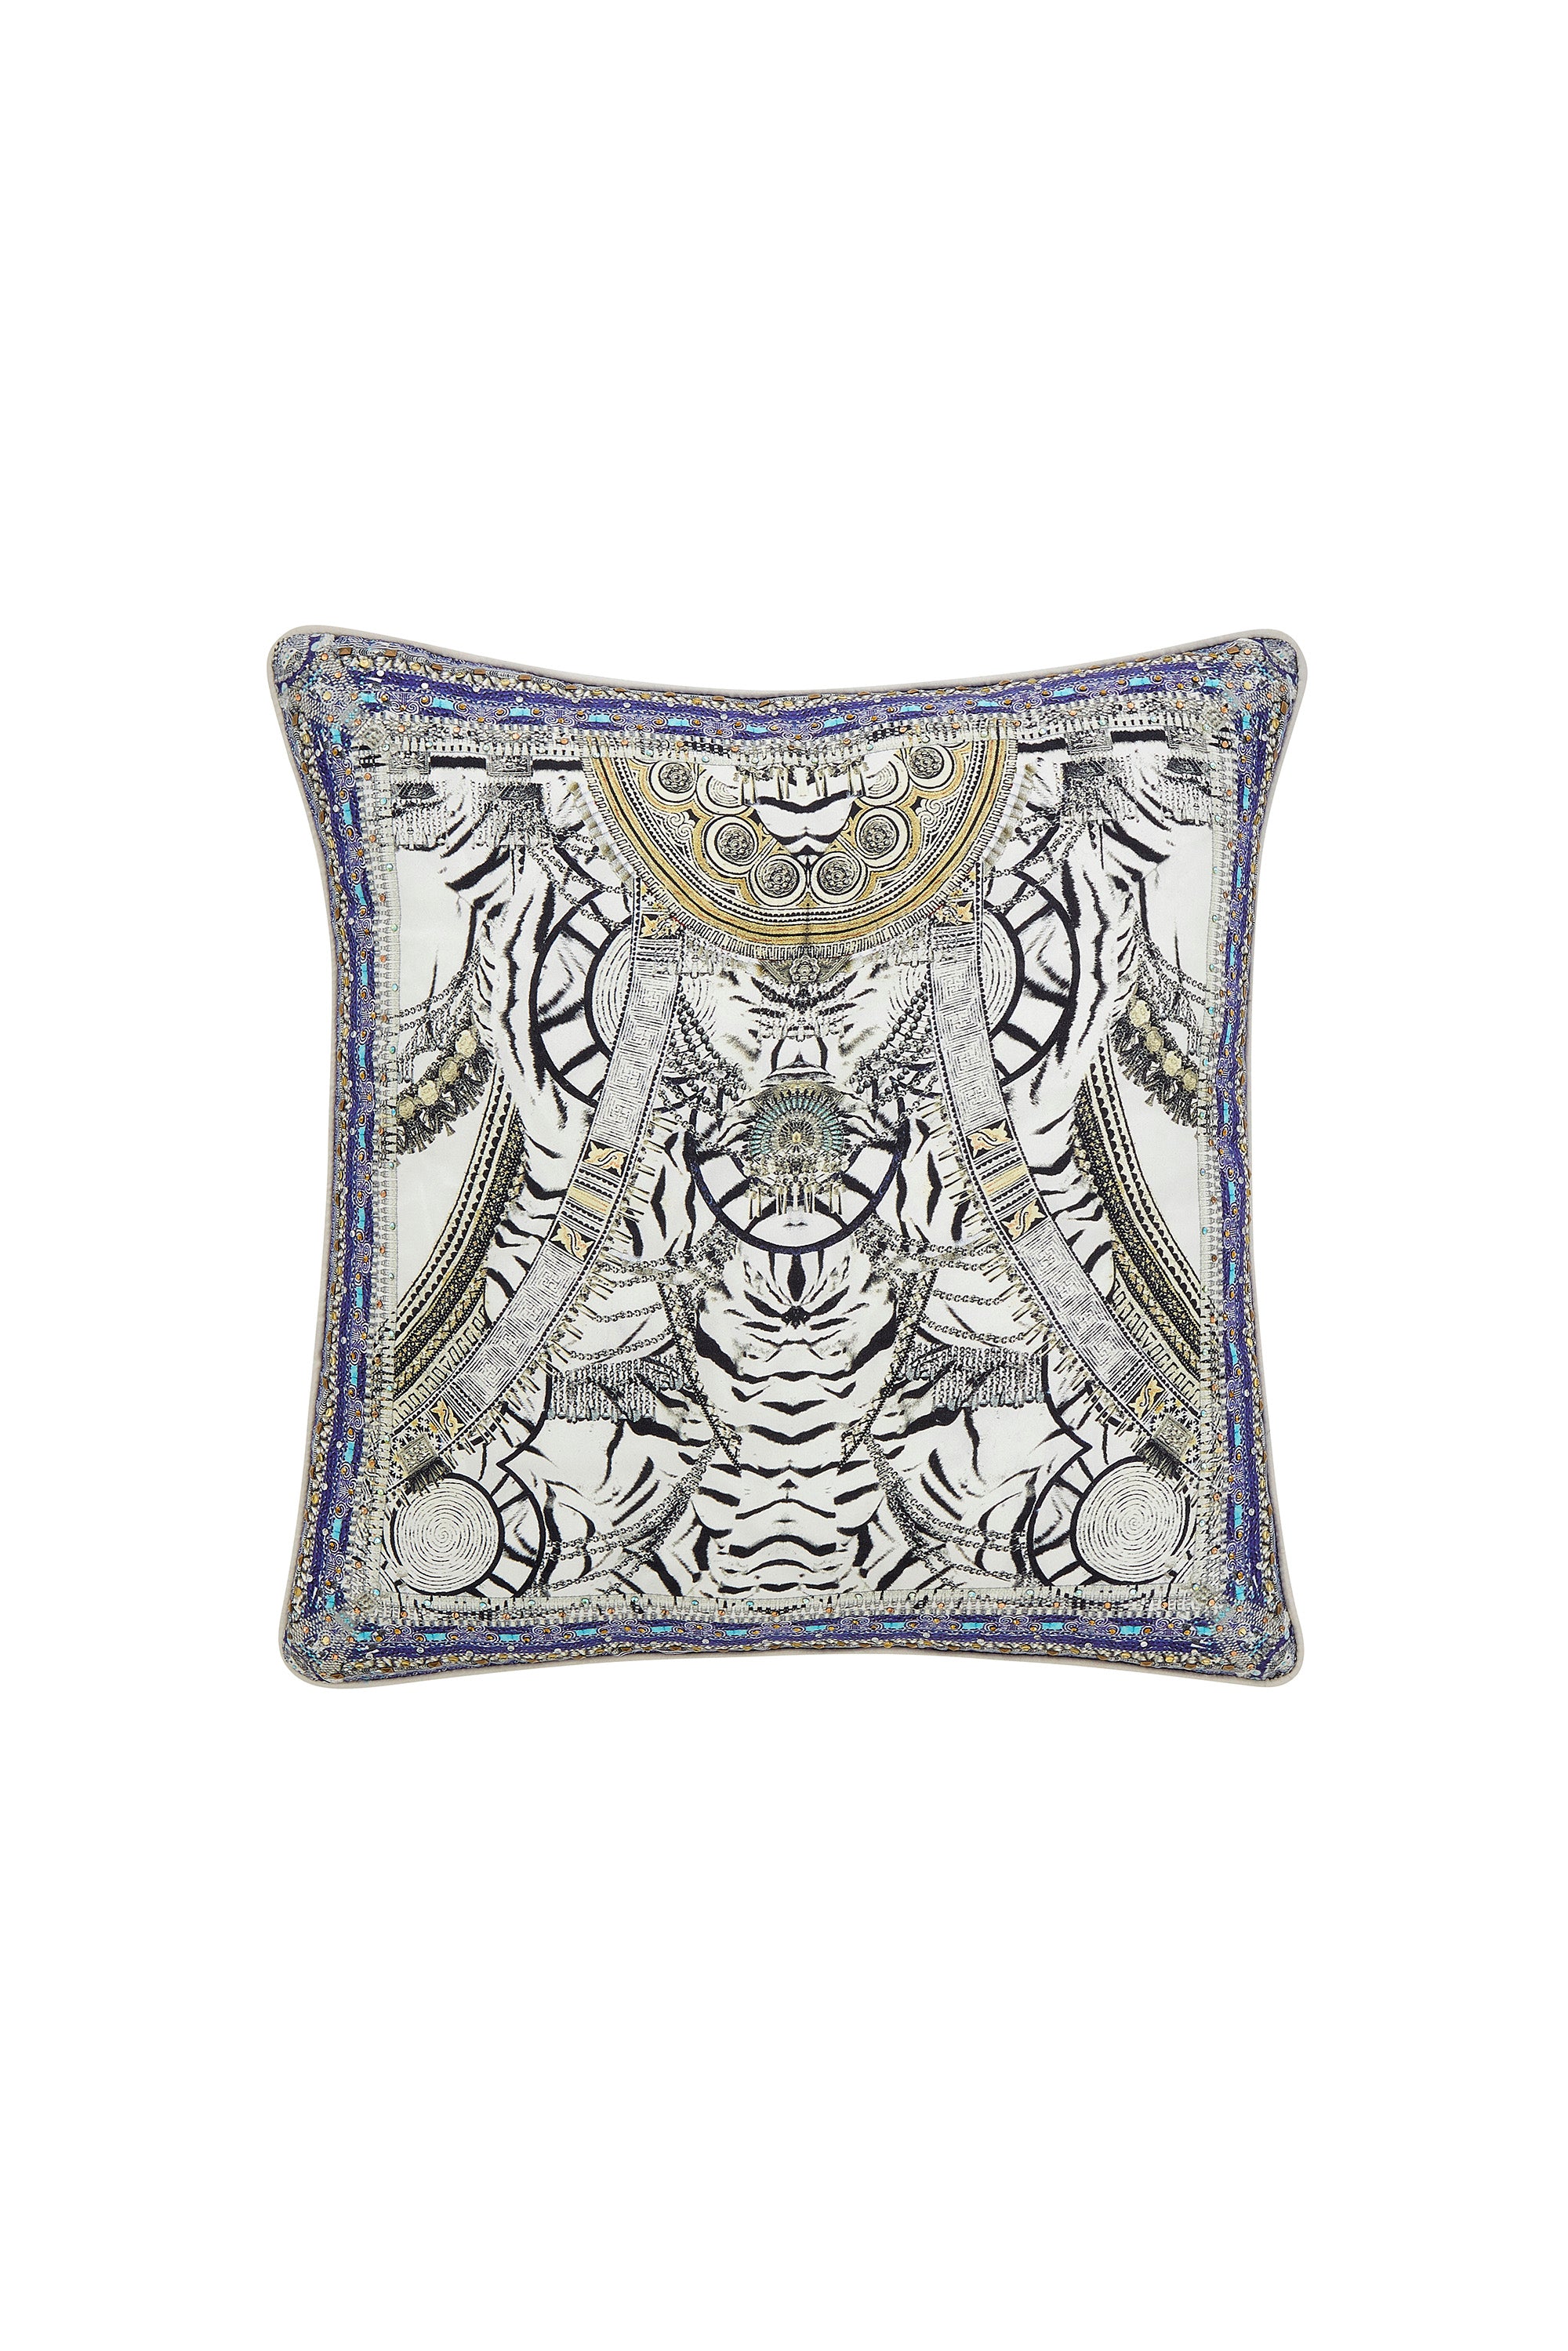 WILD BELLE SMALL SQUARE CUSHION